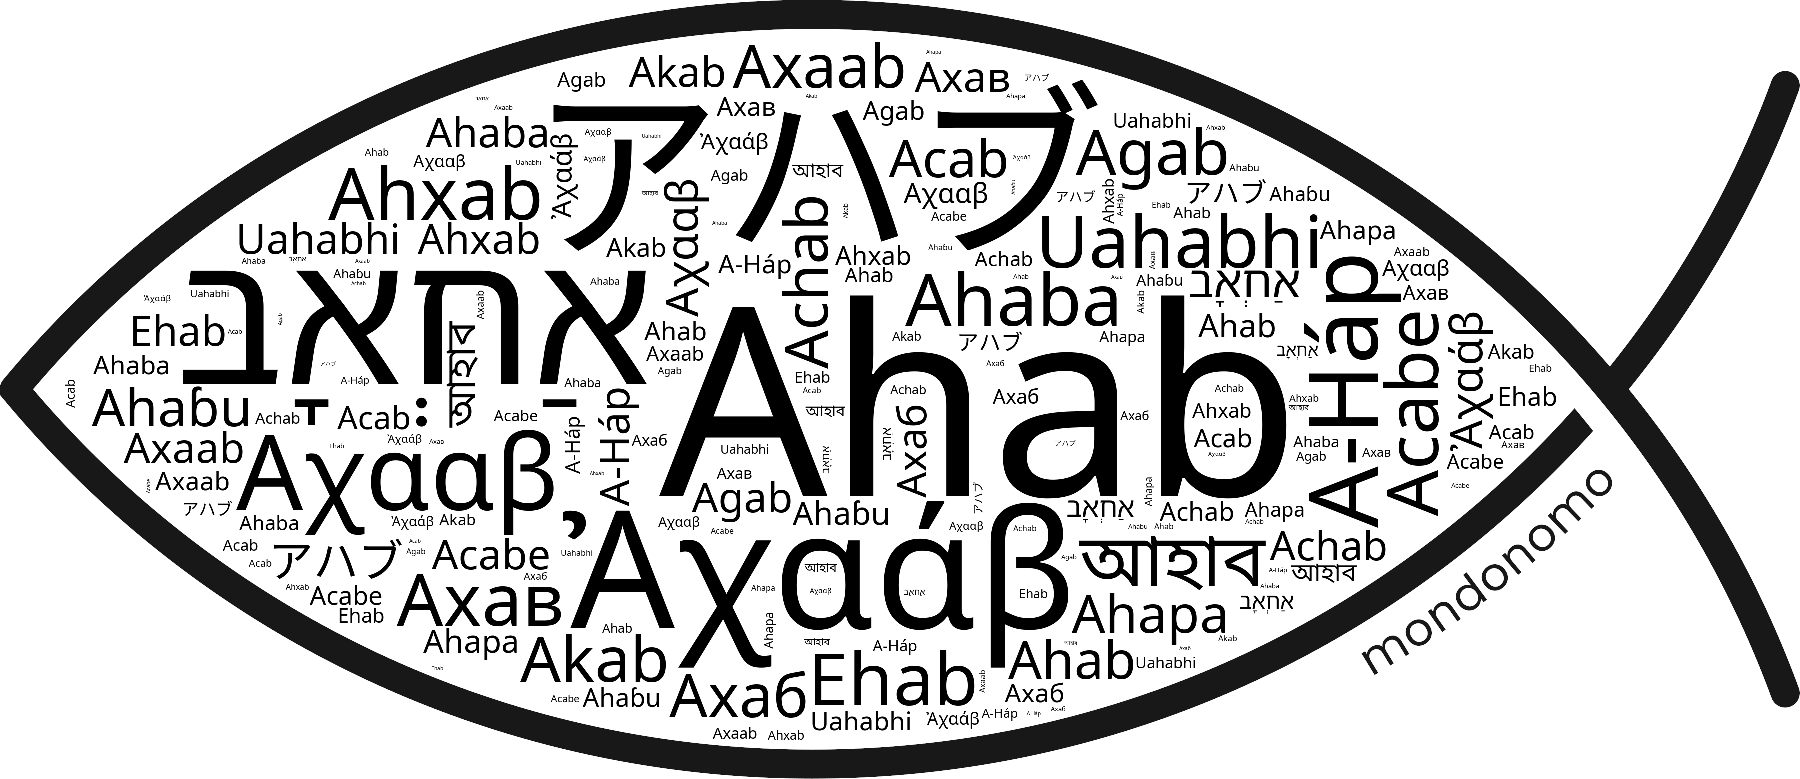 Name Ahab in the world's Bibles